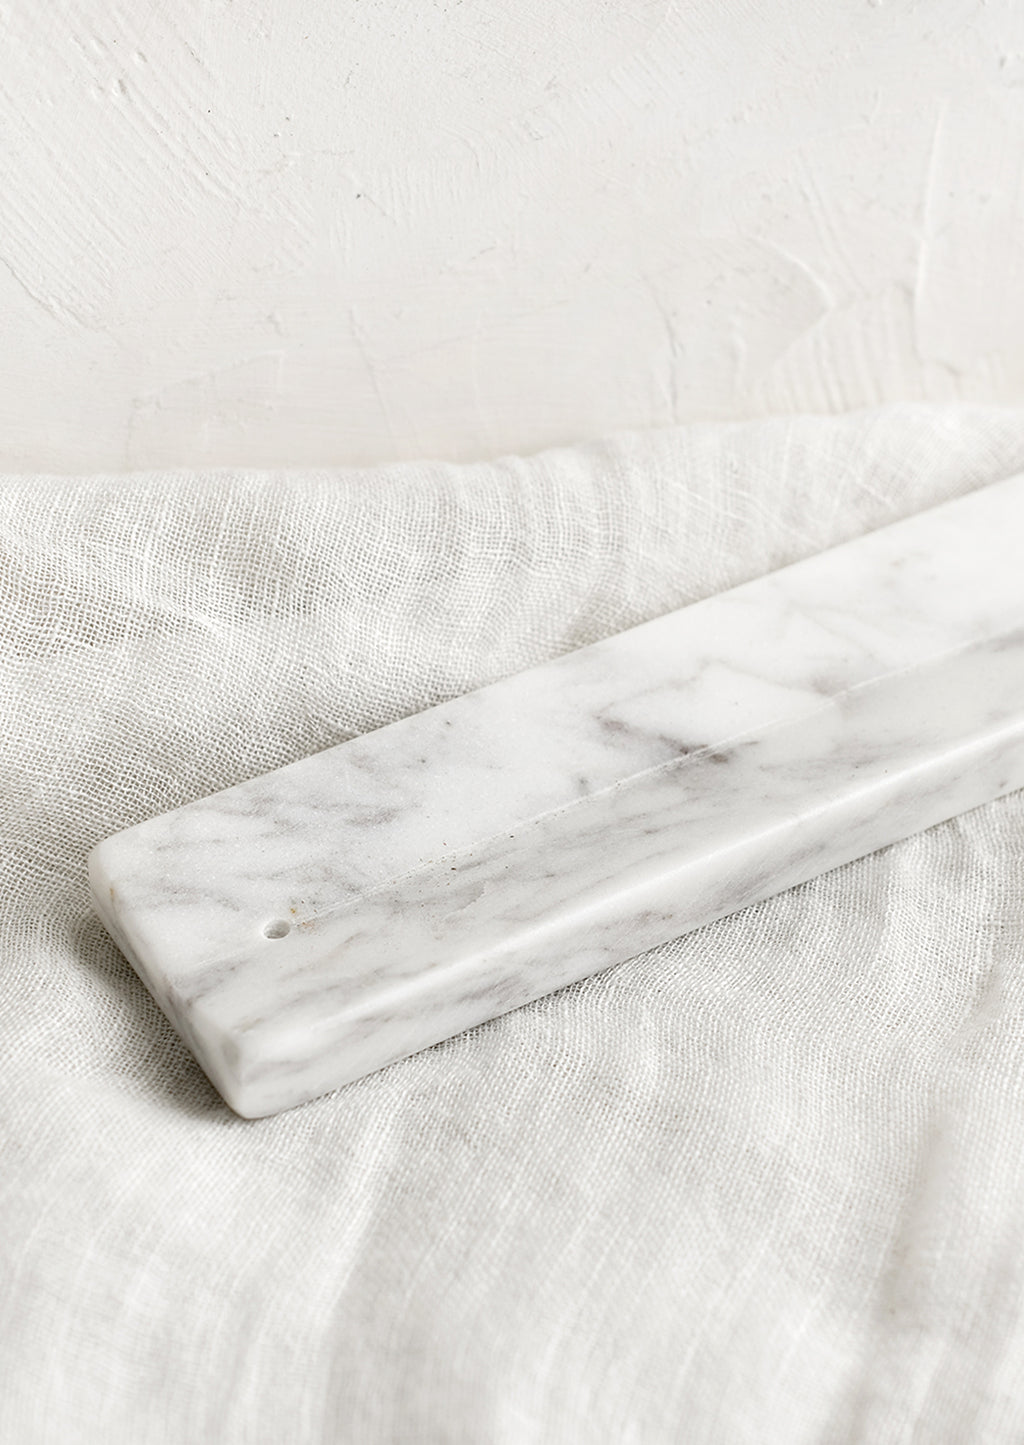 3: A long solid marble incense burner tray.